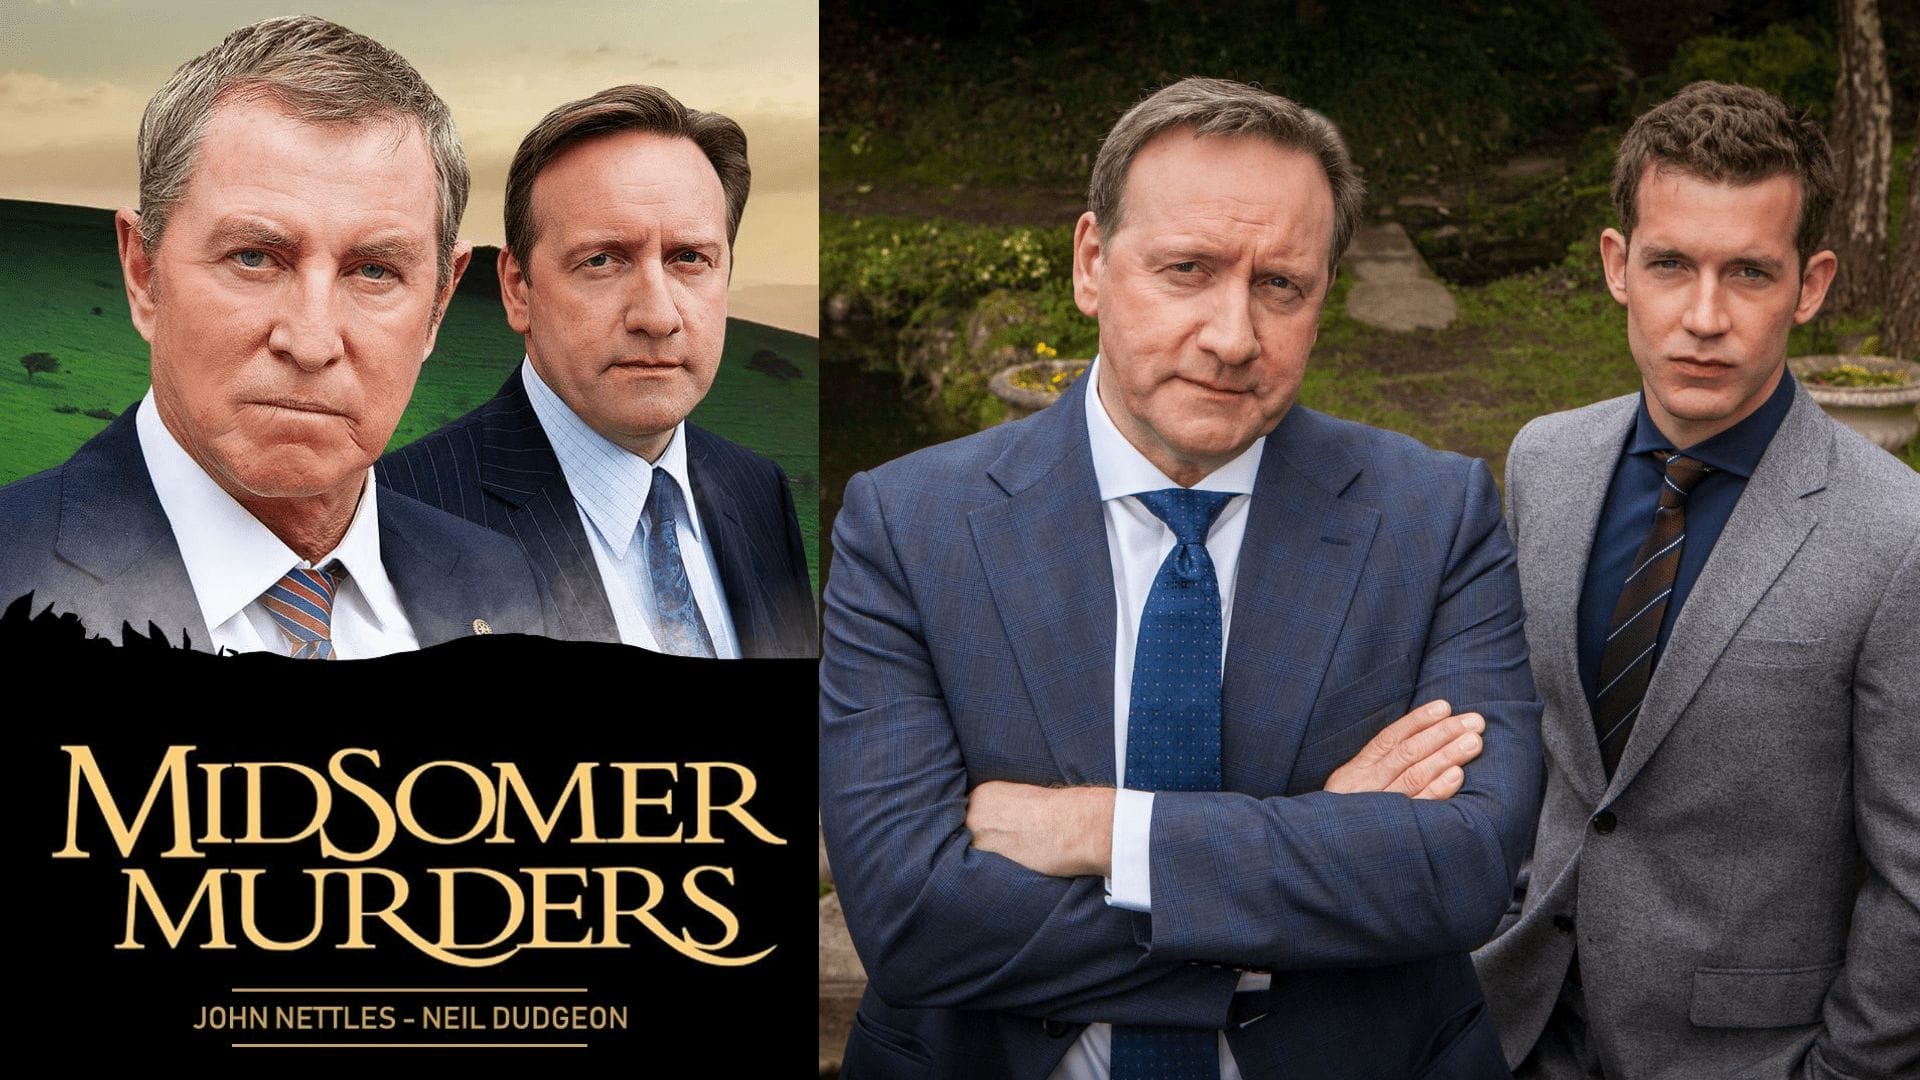 Review of Midsomer Murders (Amazon Prime) | Christian Courier